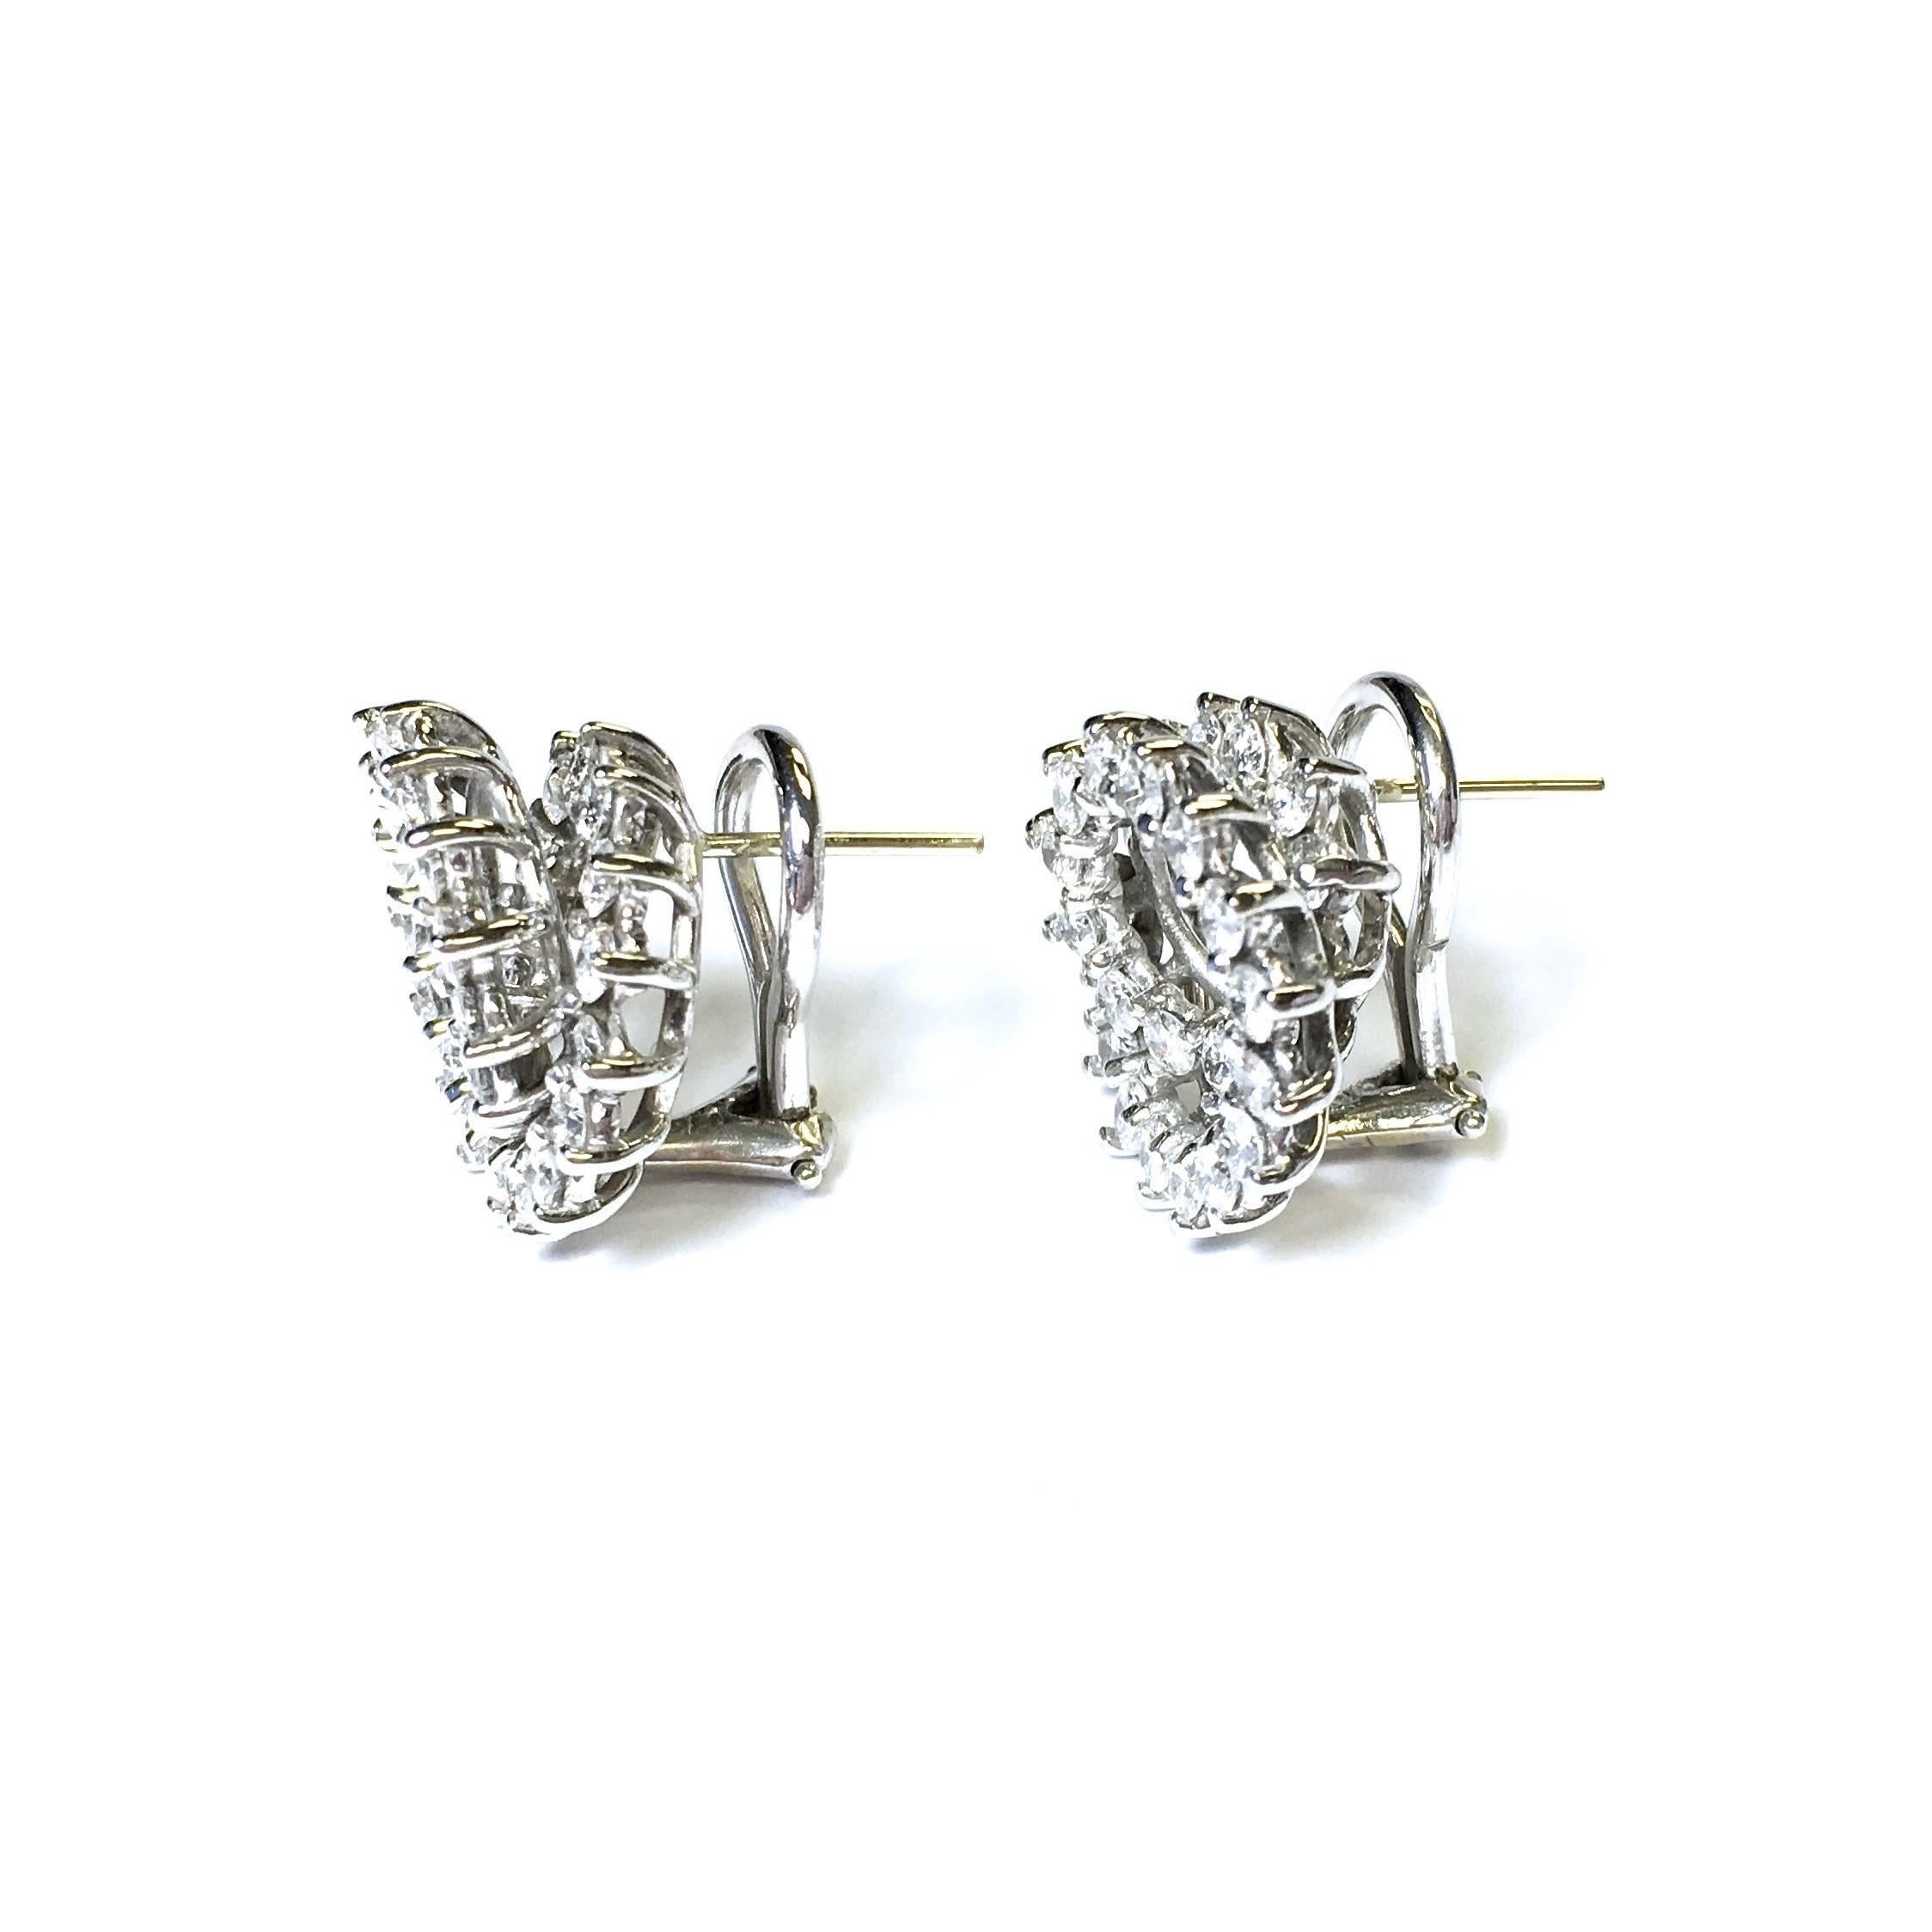 Elegand 14K white gold diamond swirl earrings set with approximately 2.25ct total weight of round brilliant cut diamonds, Color: F-G, Clarity: VS1-VS2
Each earring measures approx. 16 mm ( 5/16" ) in diameter. Post and omega backs. 
Weight: 7.6